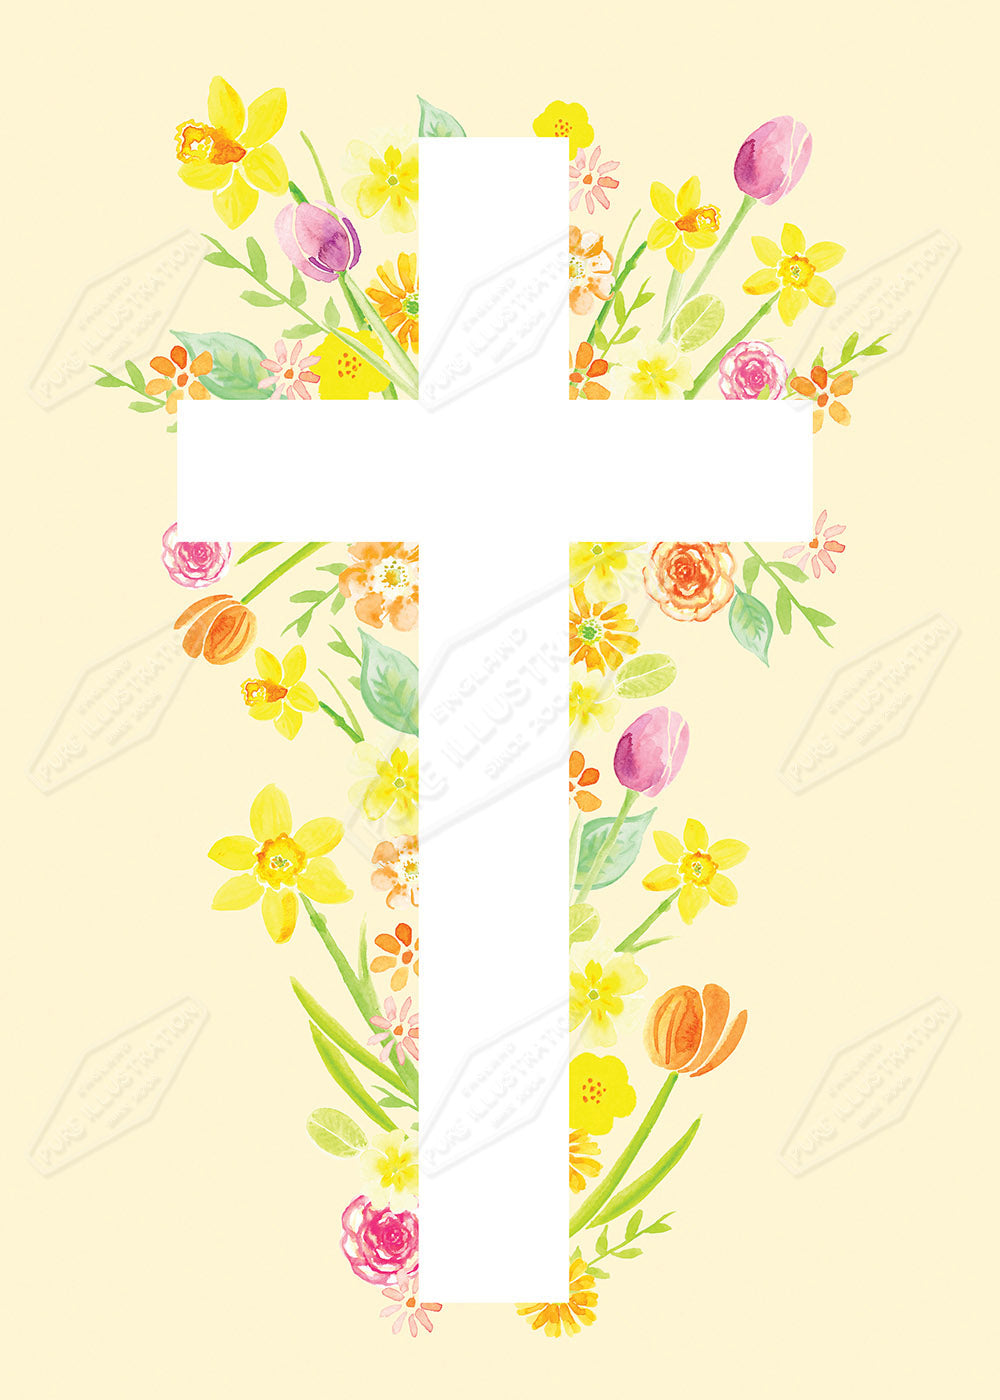 Easter Cross Design by Victoria Marks for Pure Art Licensing Agency & Surface Design Studio